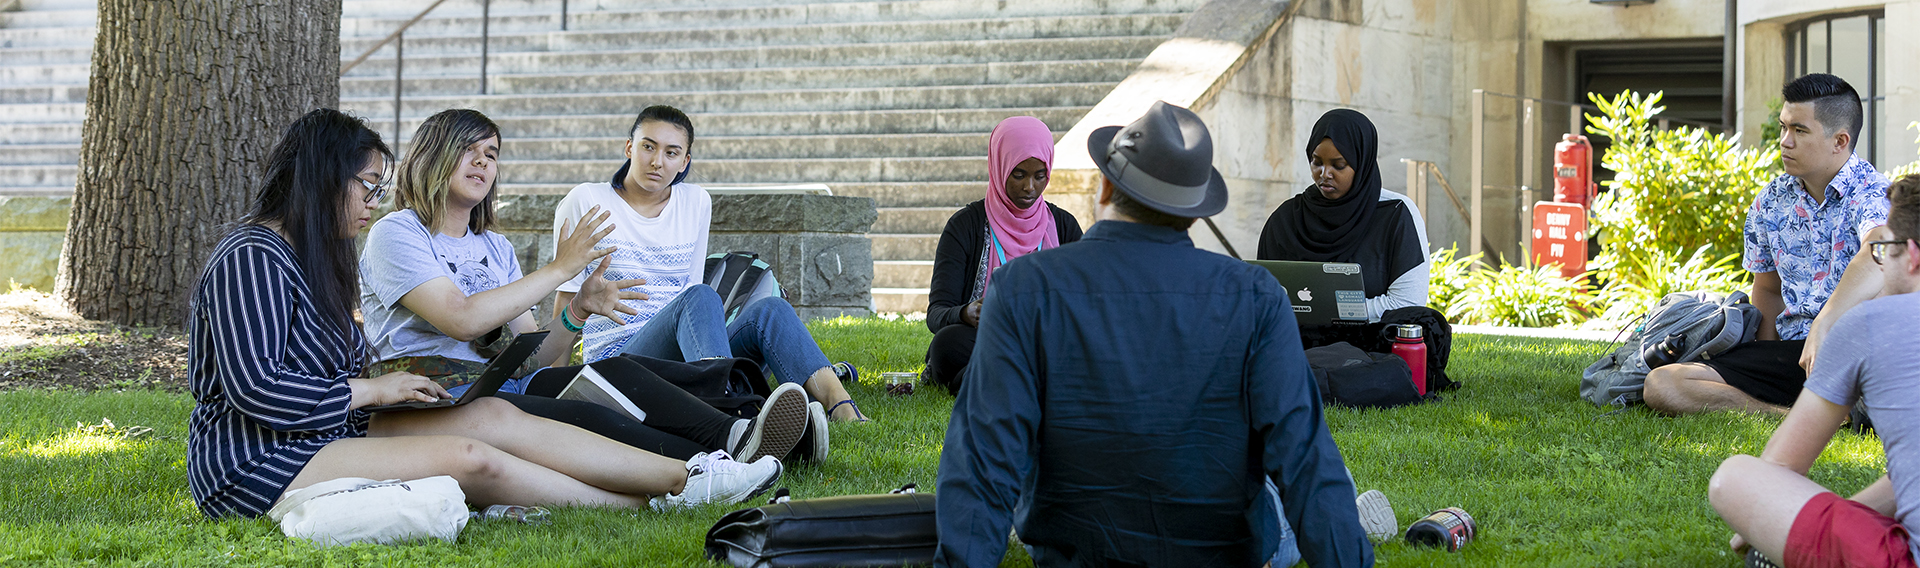 Students sitting outside on grass